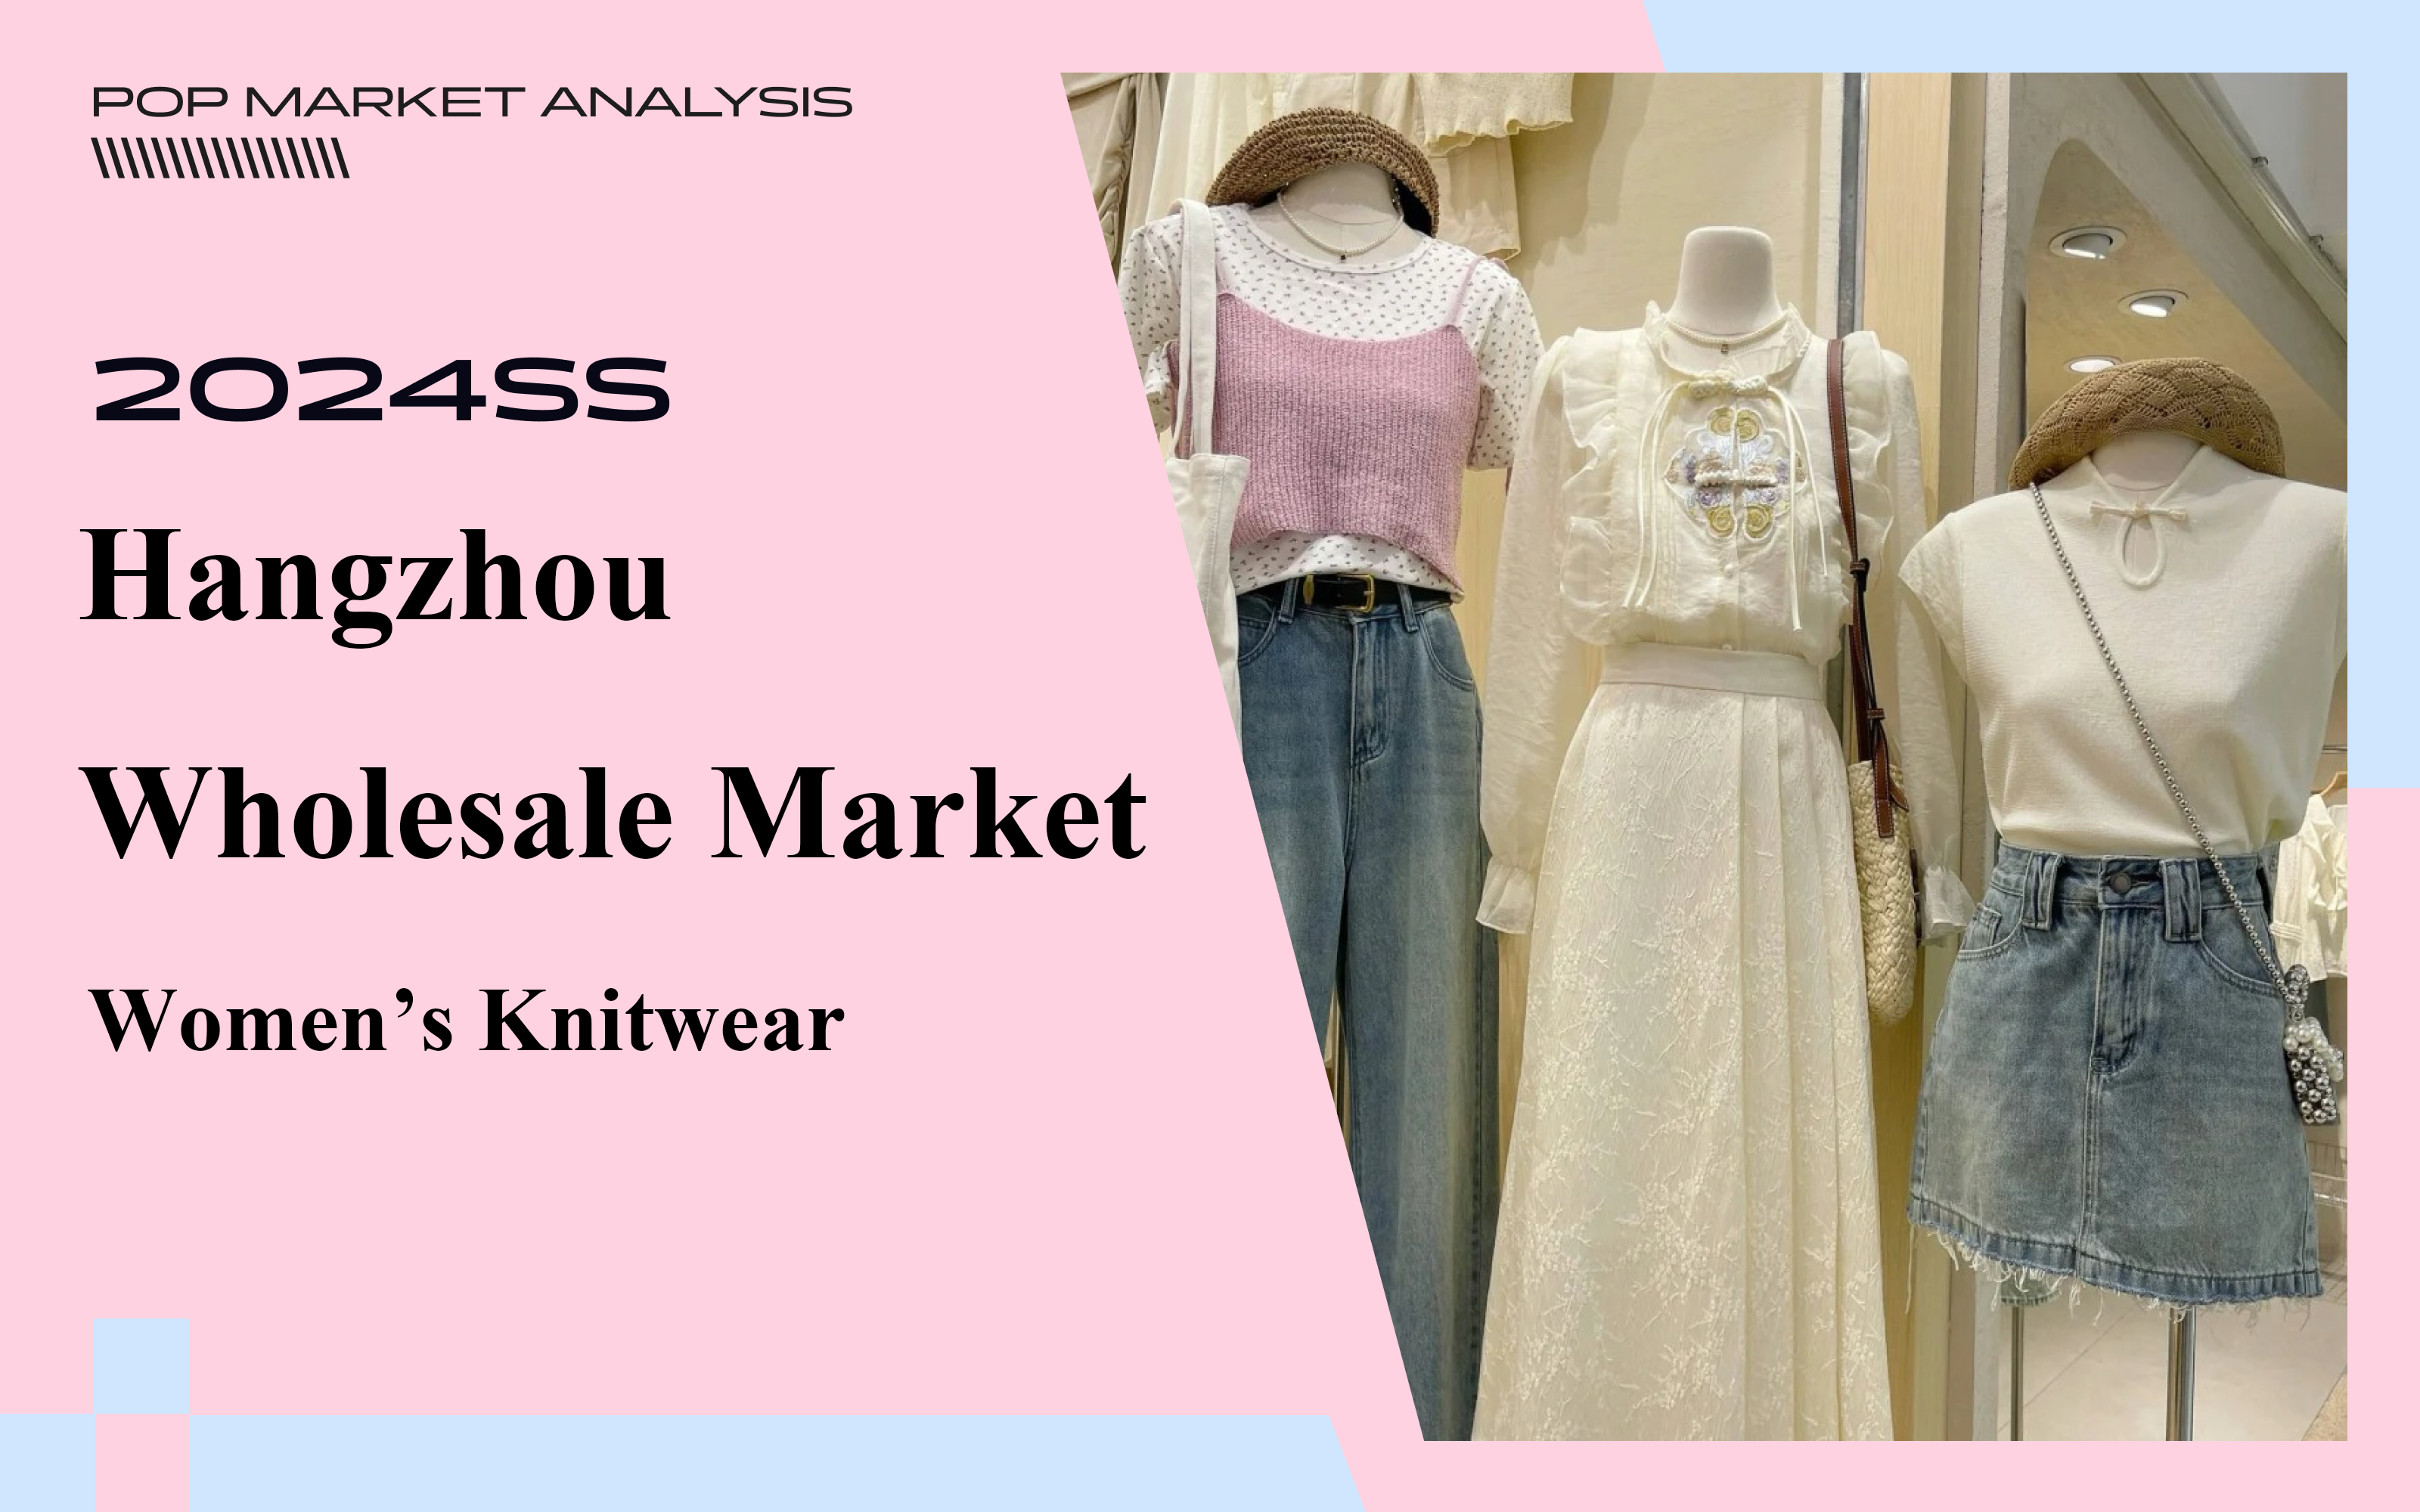 The Comprehensive Analysis of Hangzhou Wholesale Market for Women's Knitwear in April